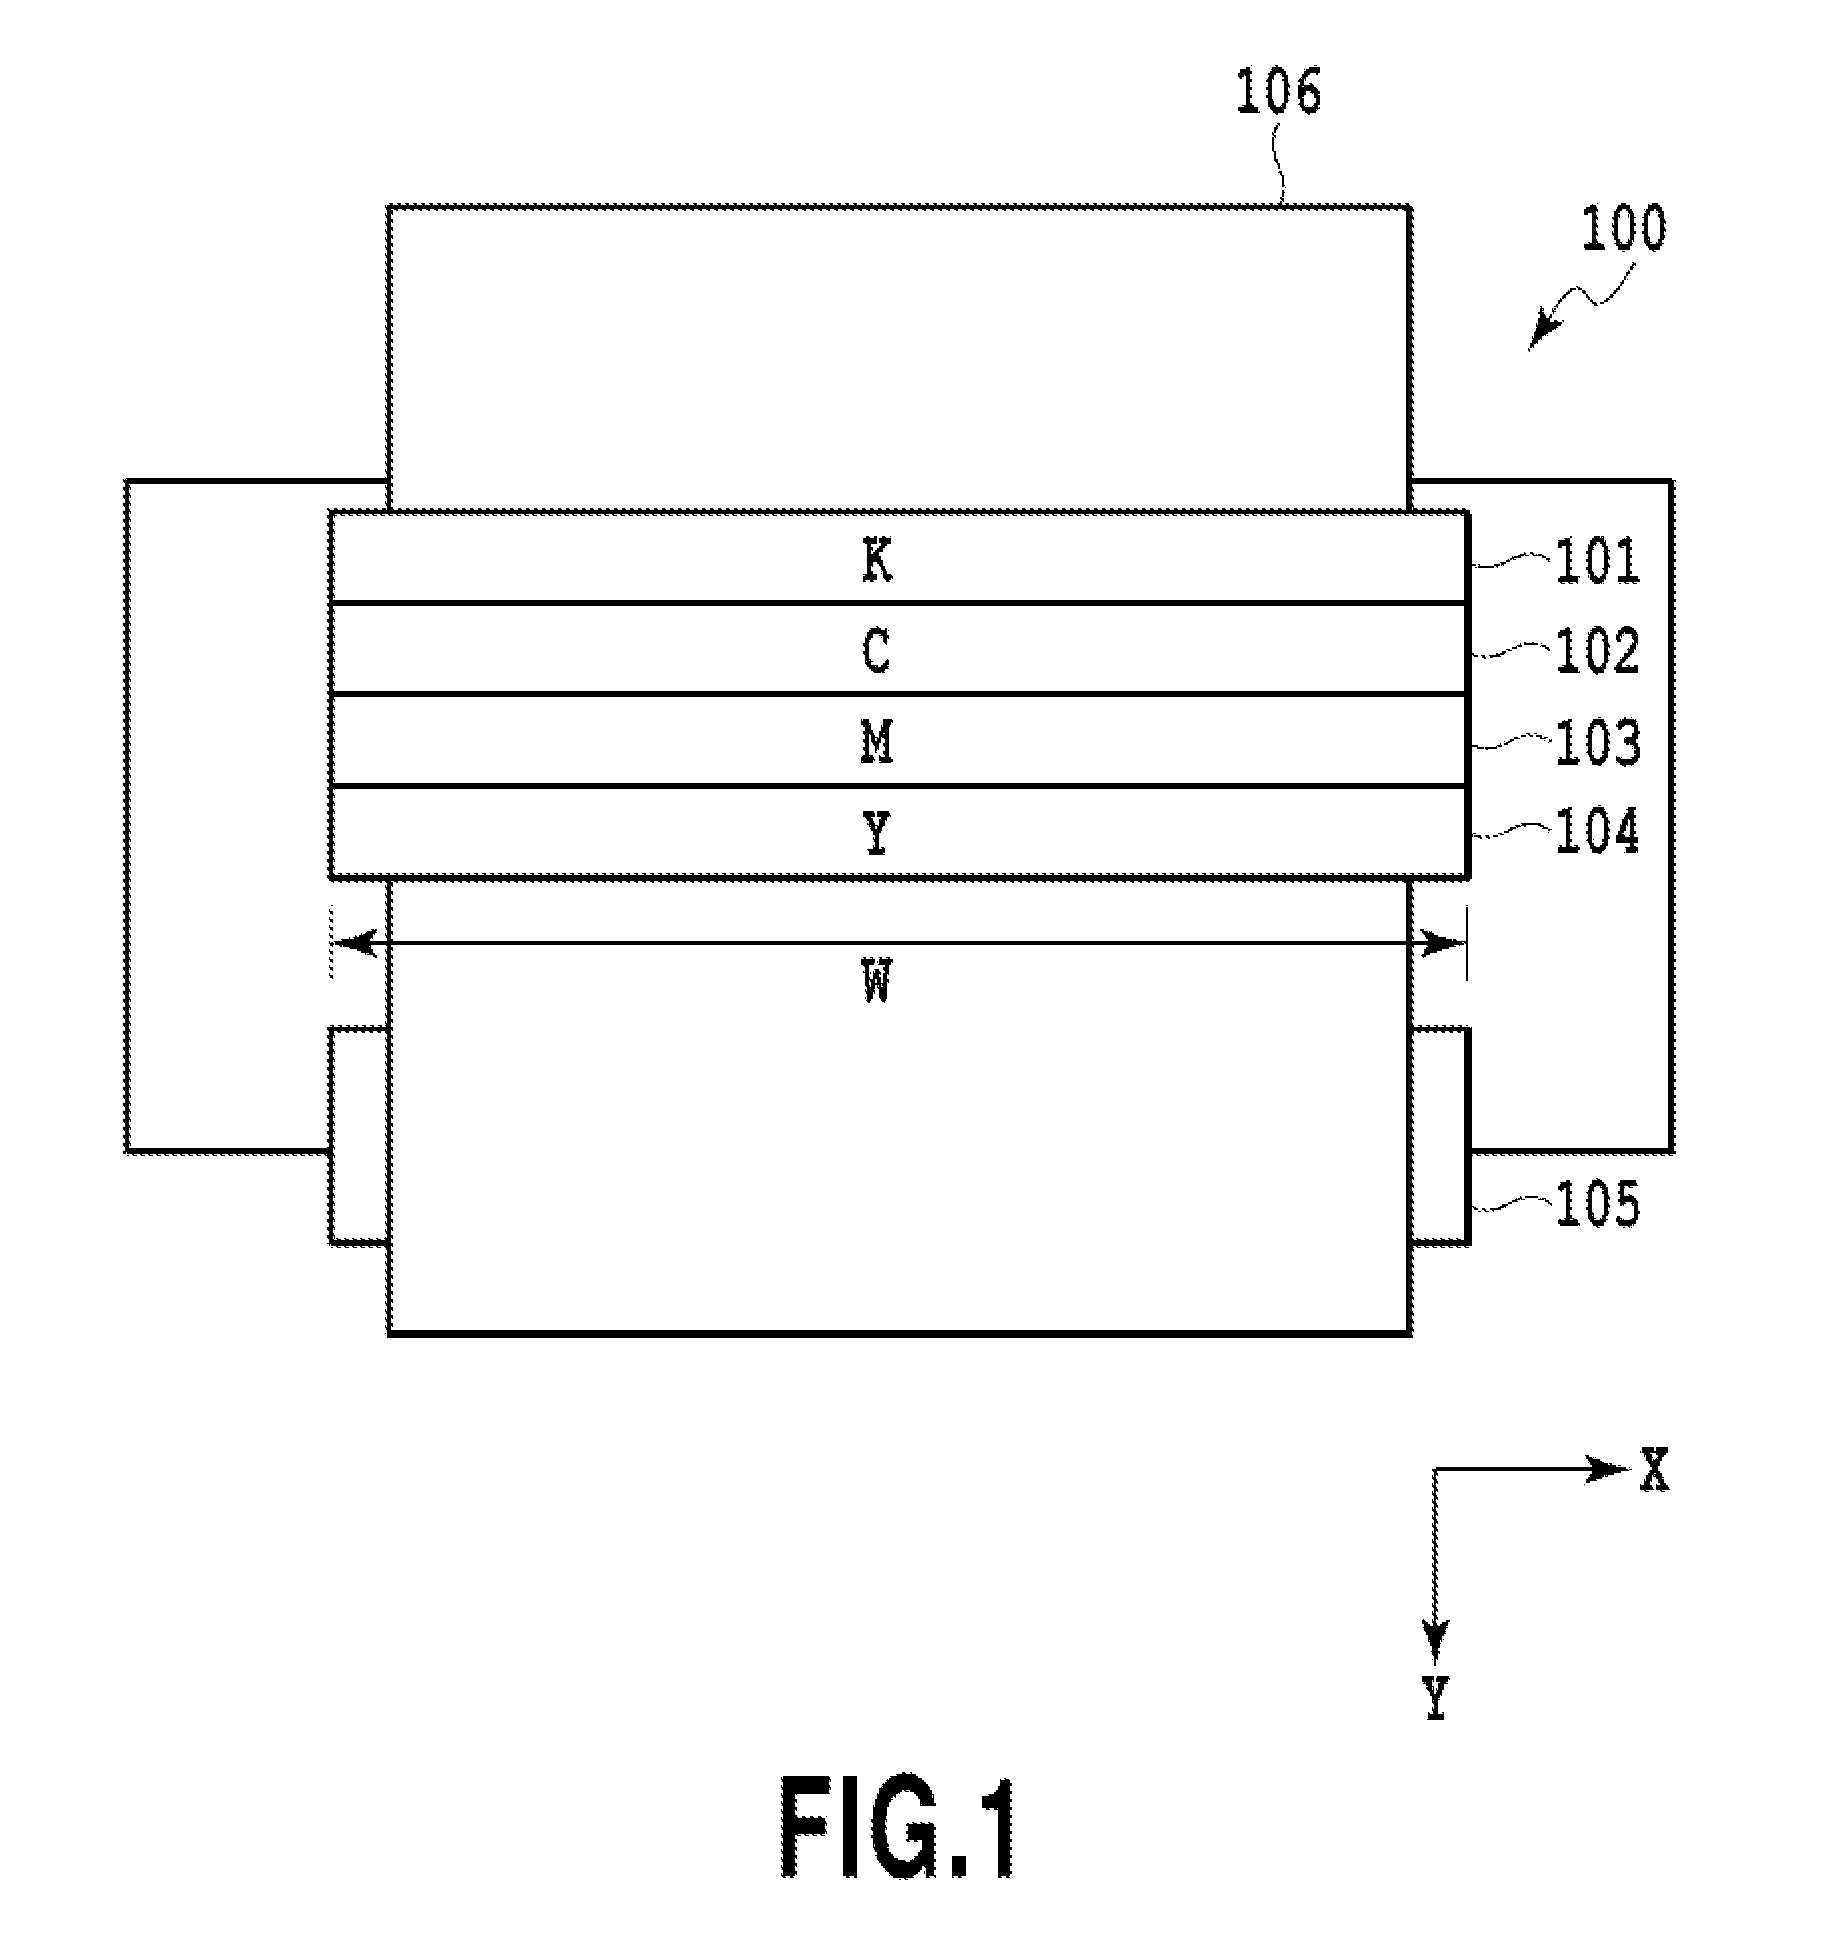 Image processing apparatus and method using different dither patterns for different inks and selecting a quantization process for each ink